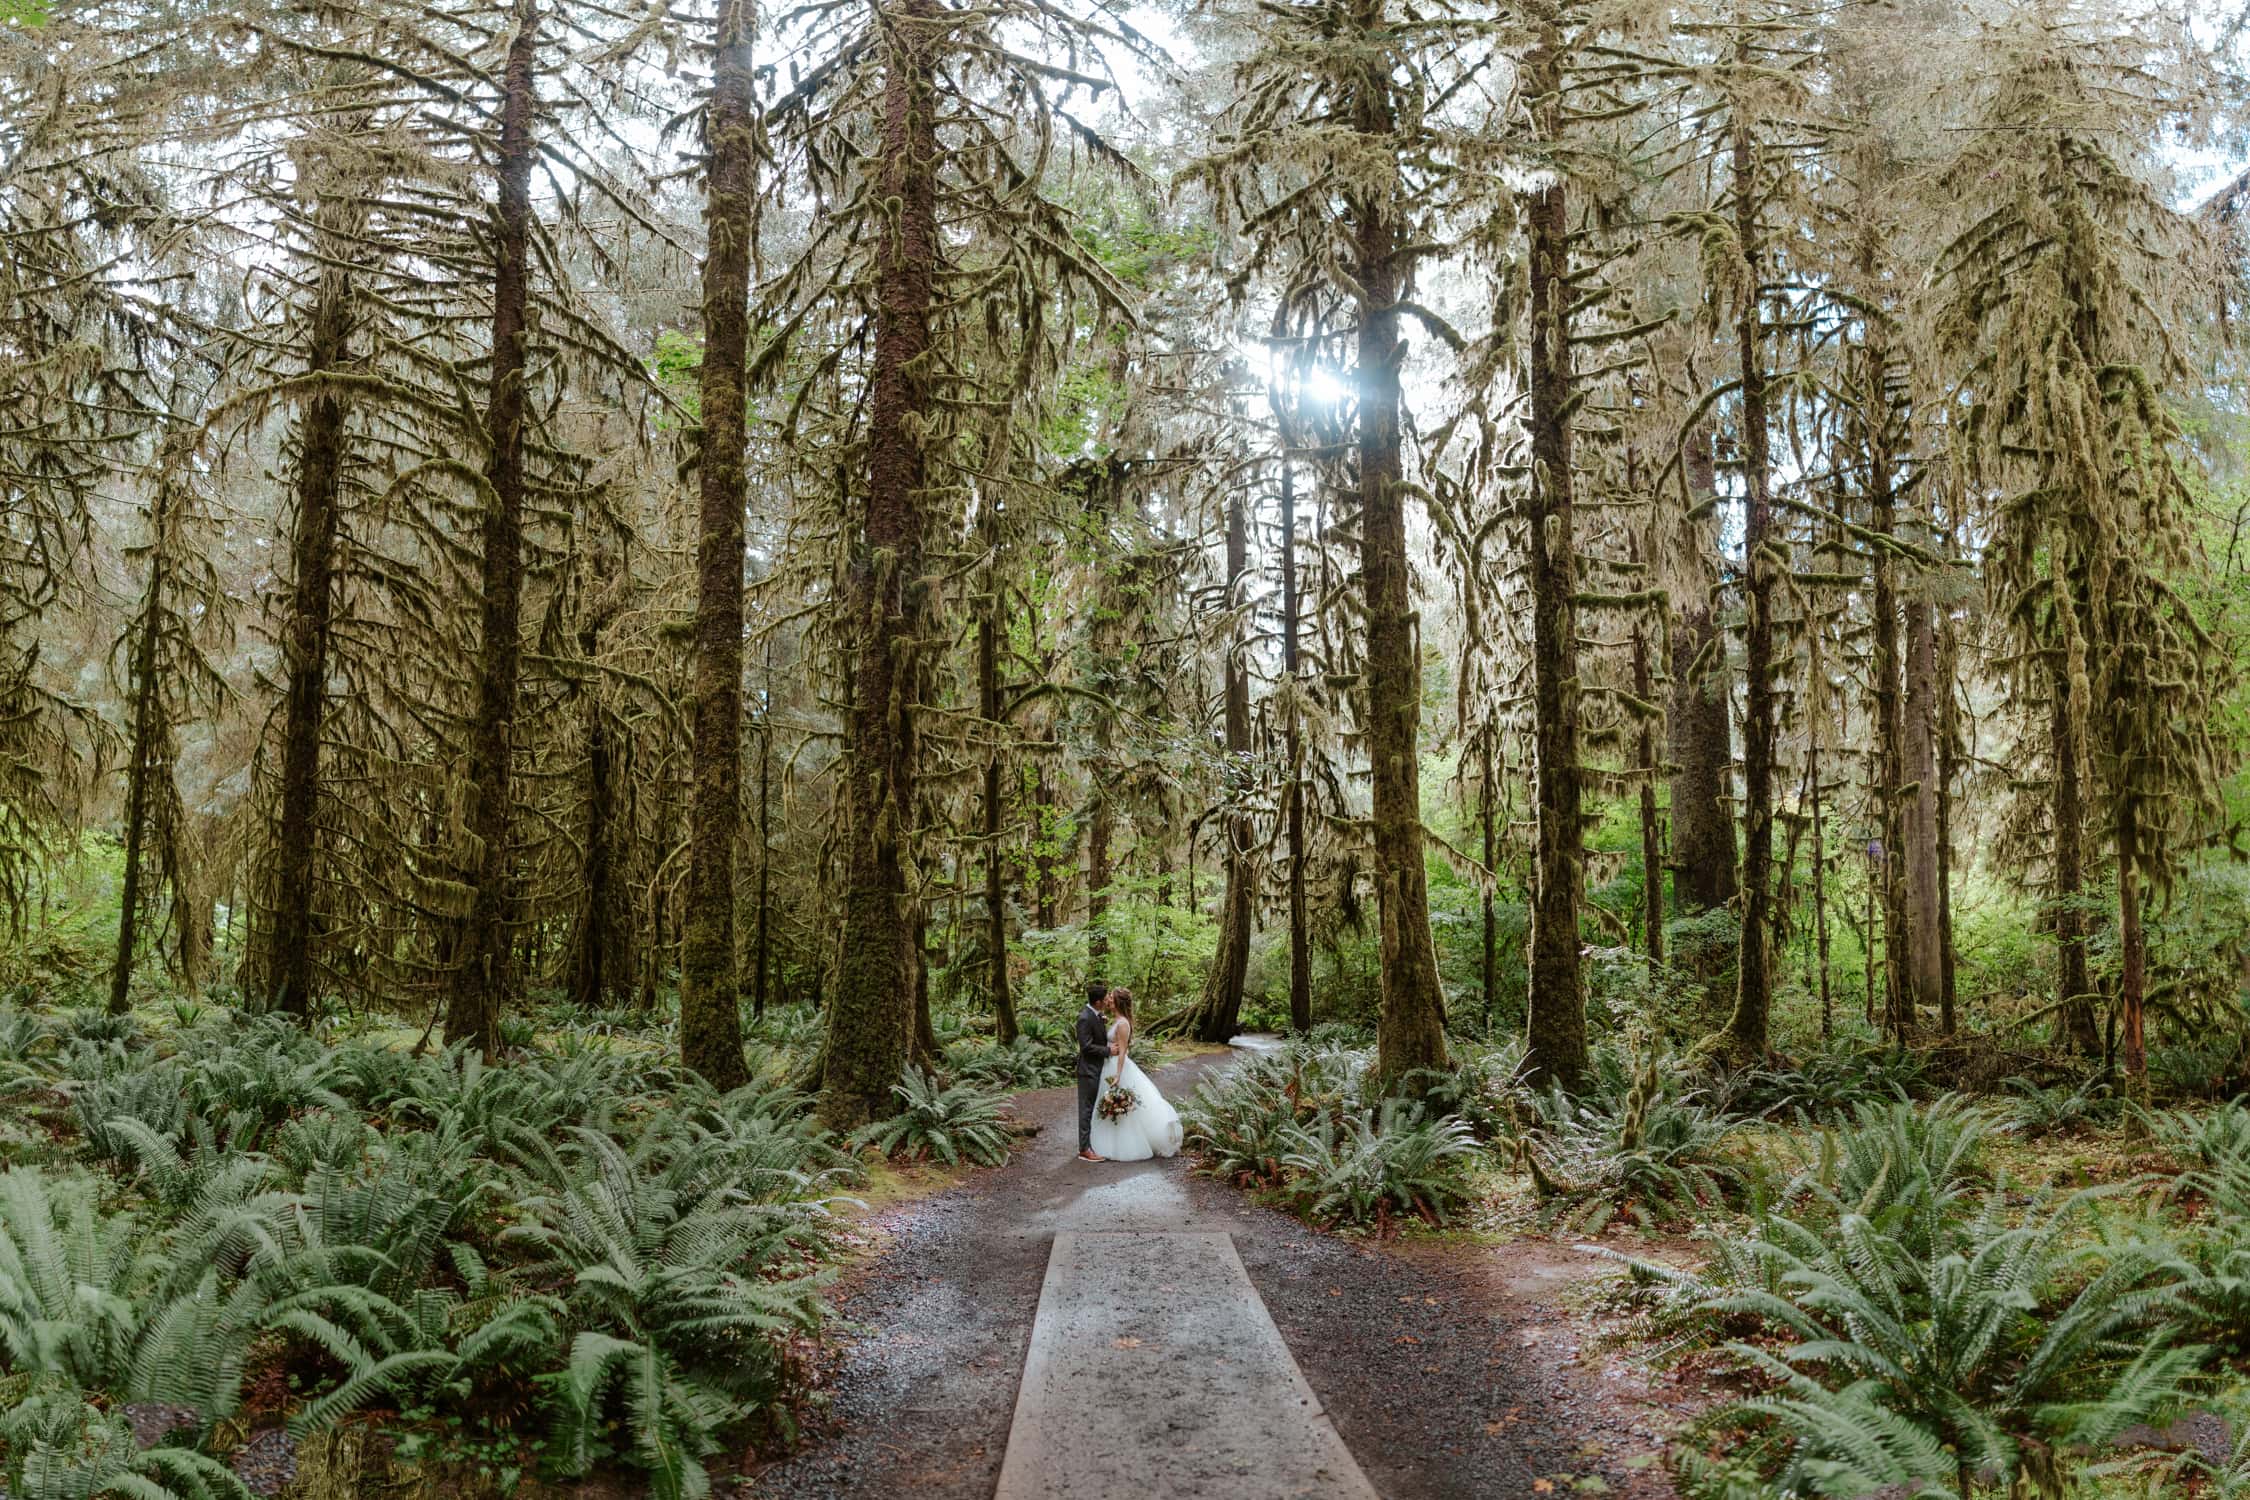 A couple kissing on their wedding day in the Hoh Rainforest.